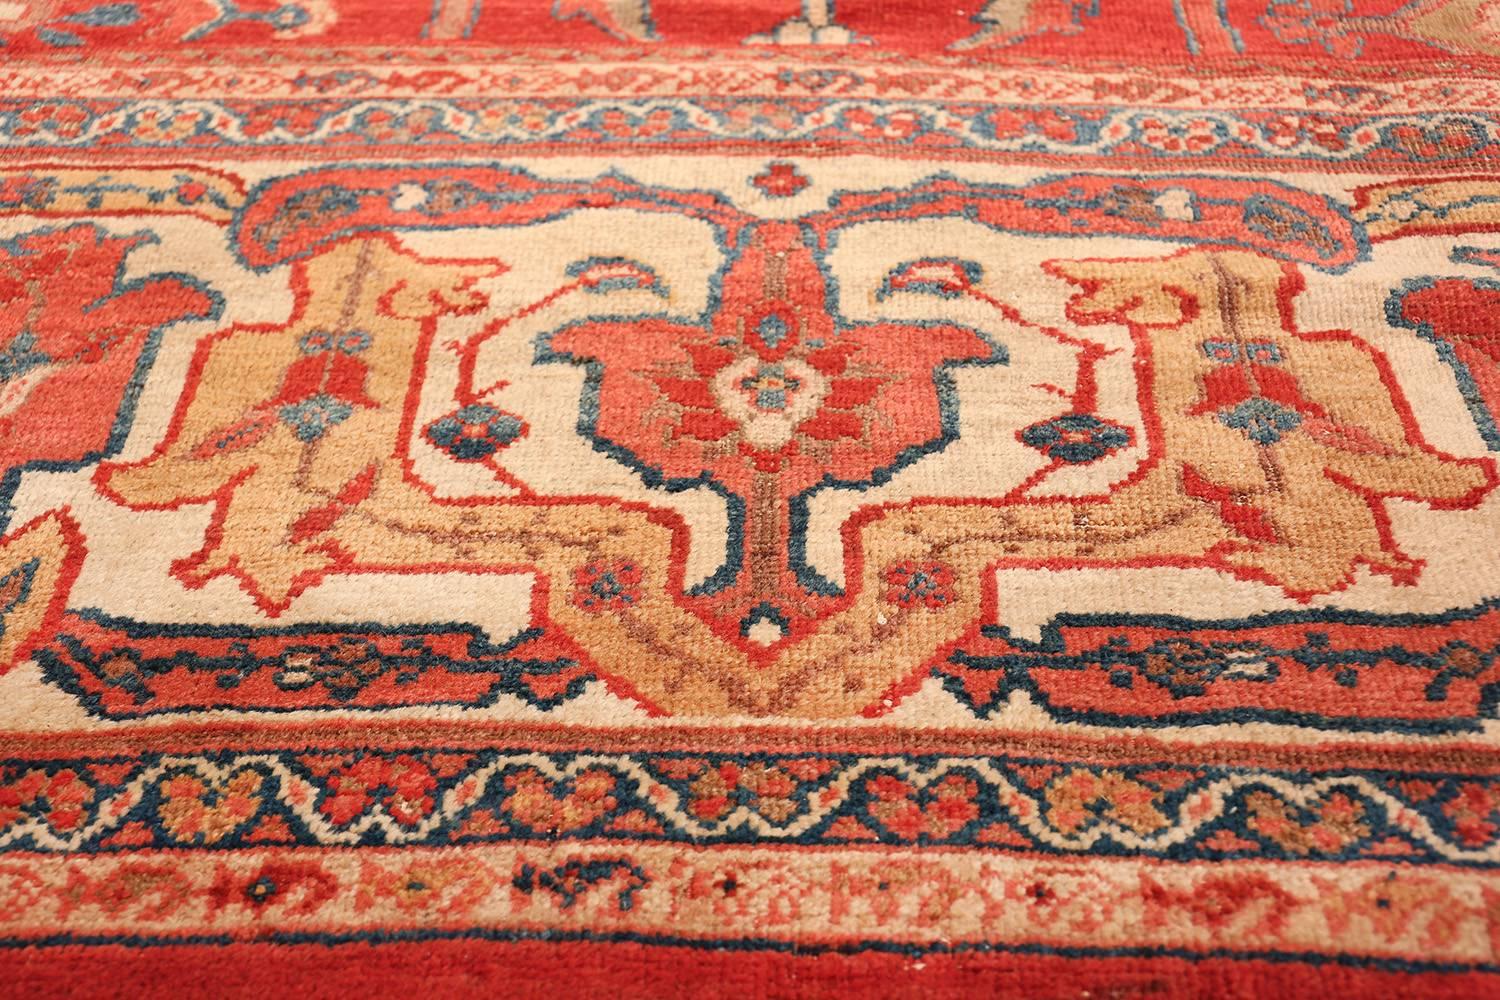 Largw Oversize Red Antique Persian Sultanabad Rug. Size: 14 ft x 21 ft 5